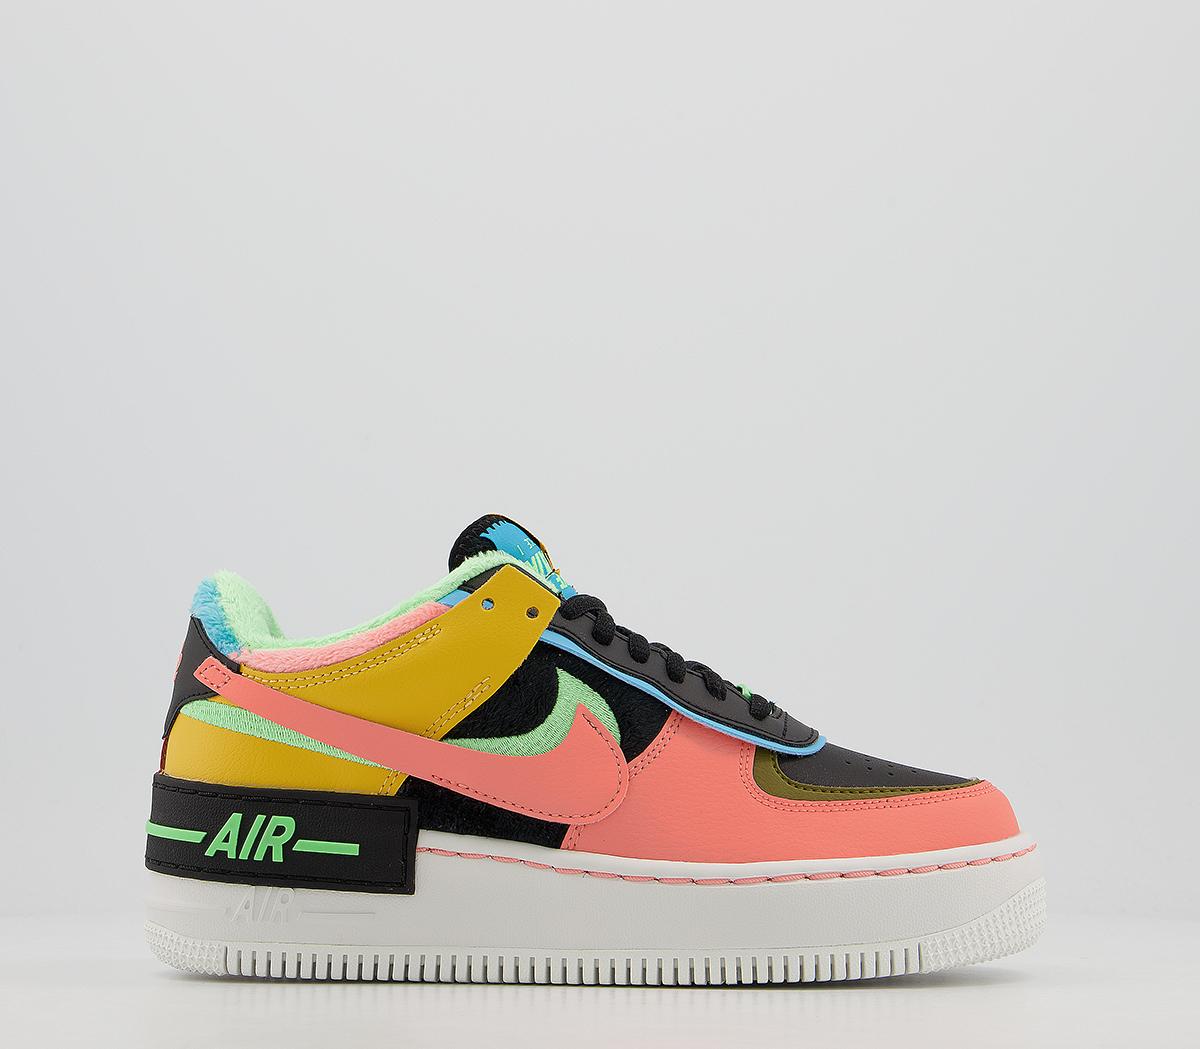 NikeAir Force 1 Shadow TrainersSolar Flare Atomic Pink Baltic Blue